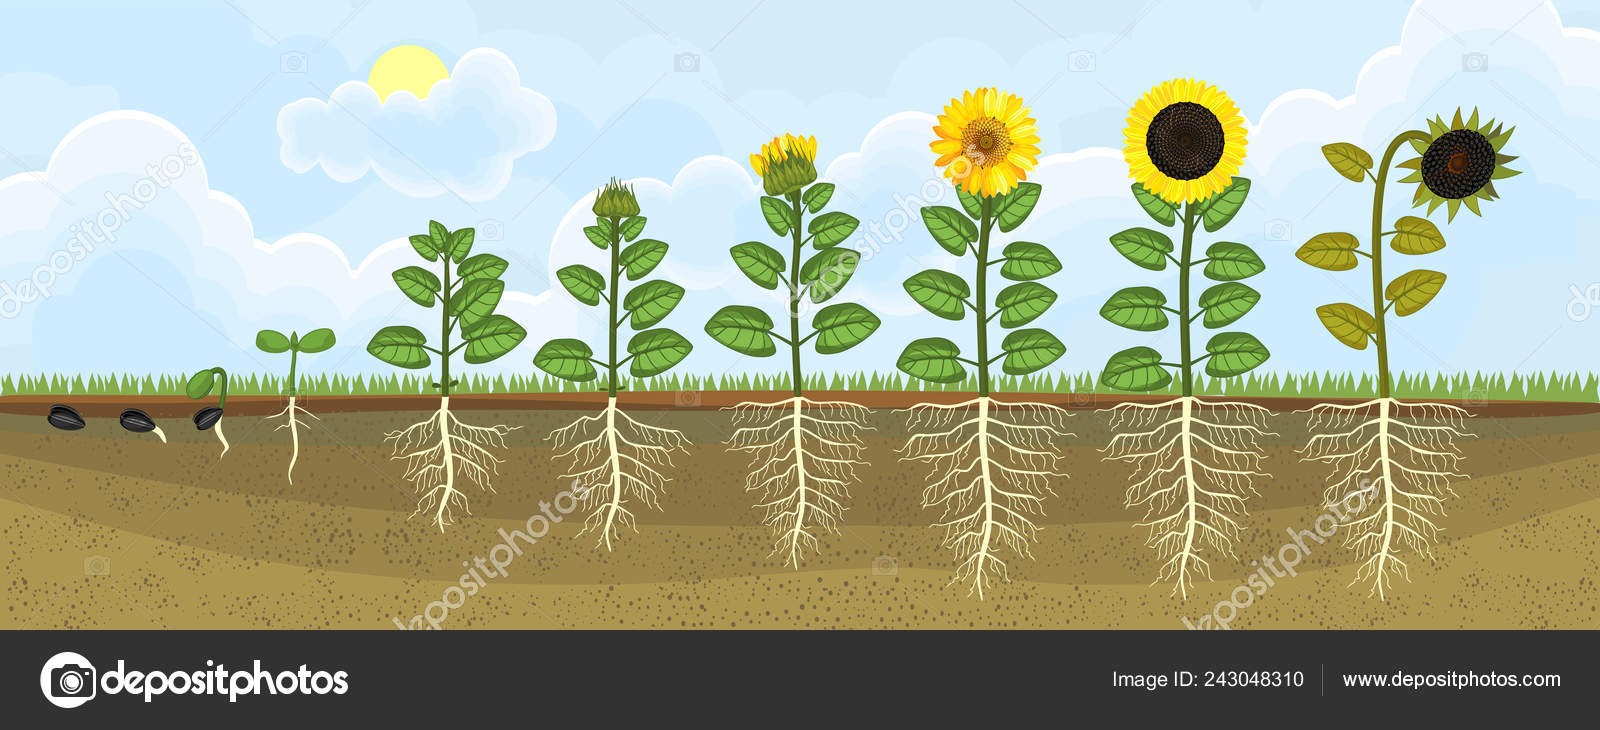 Plants: Life Cycles Sunflowers 